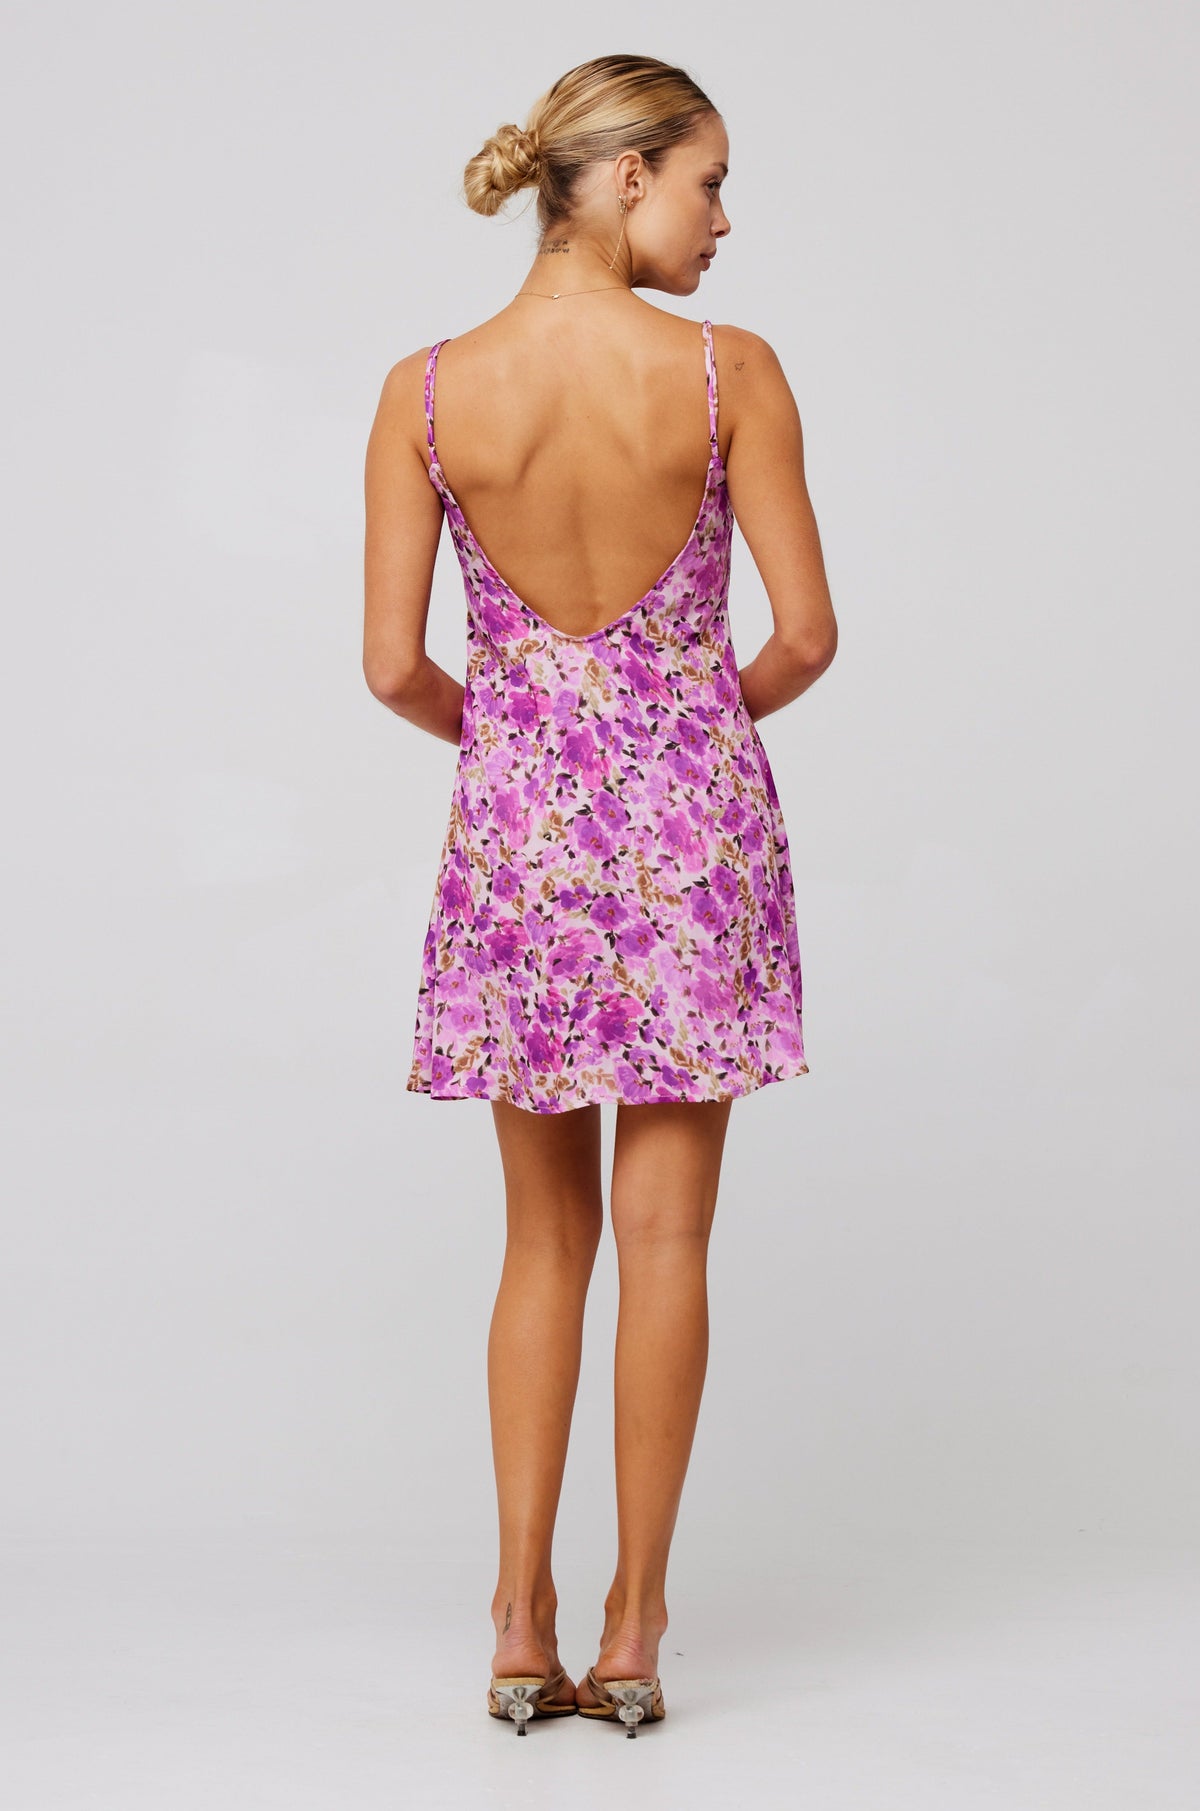 This is an image of Penny Mini in Lilac - RESA featuring a model wearing the dress